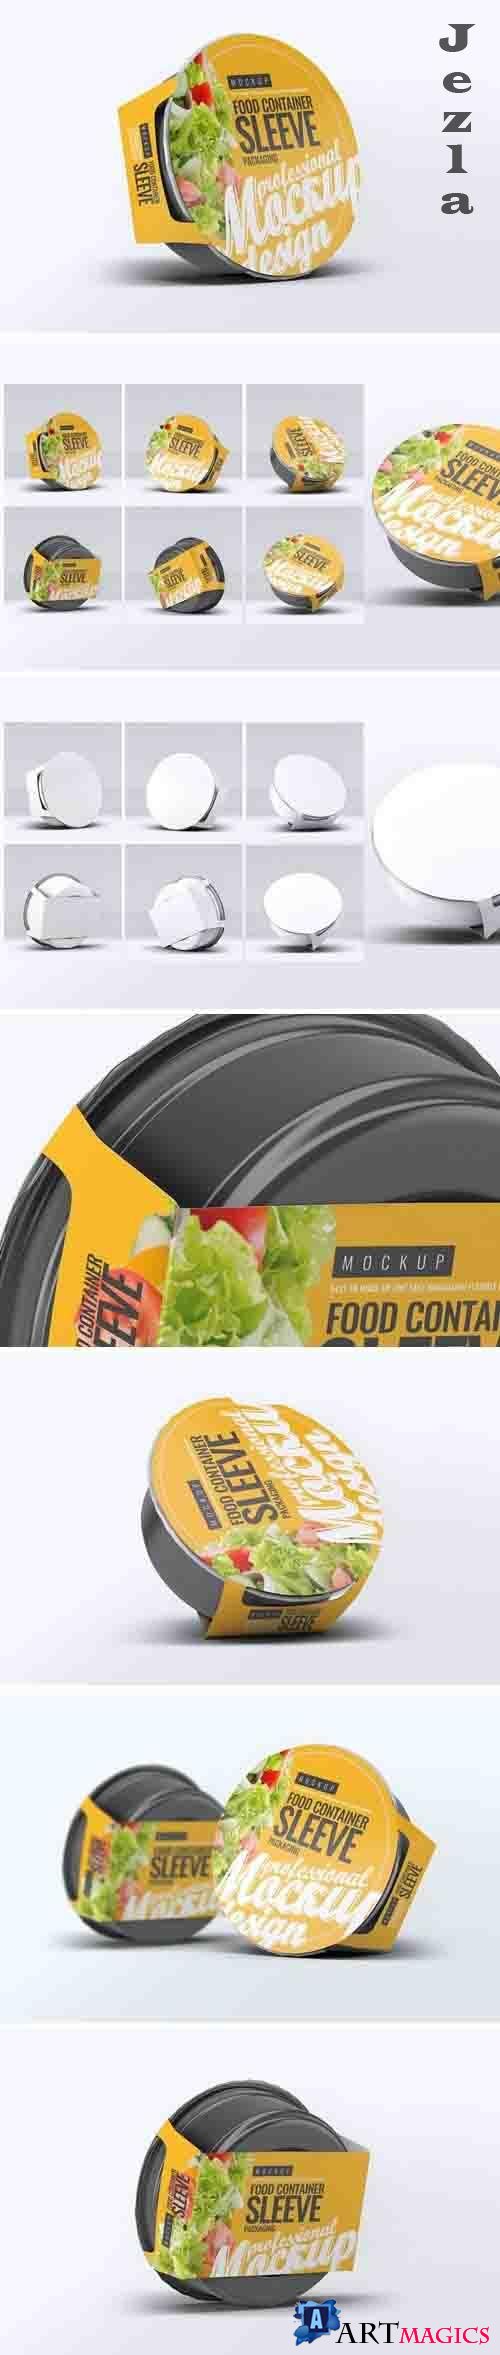 Food Container Sleeve Packaging Mock-Up v.1